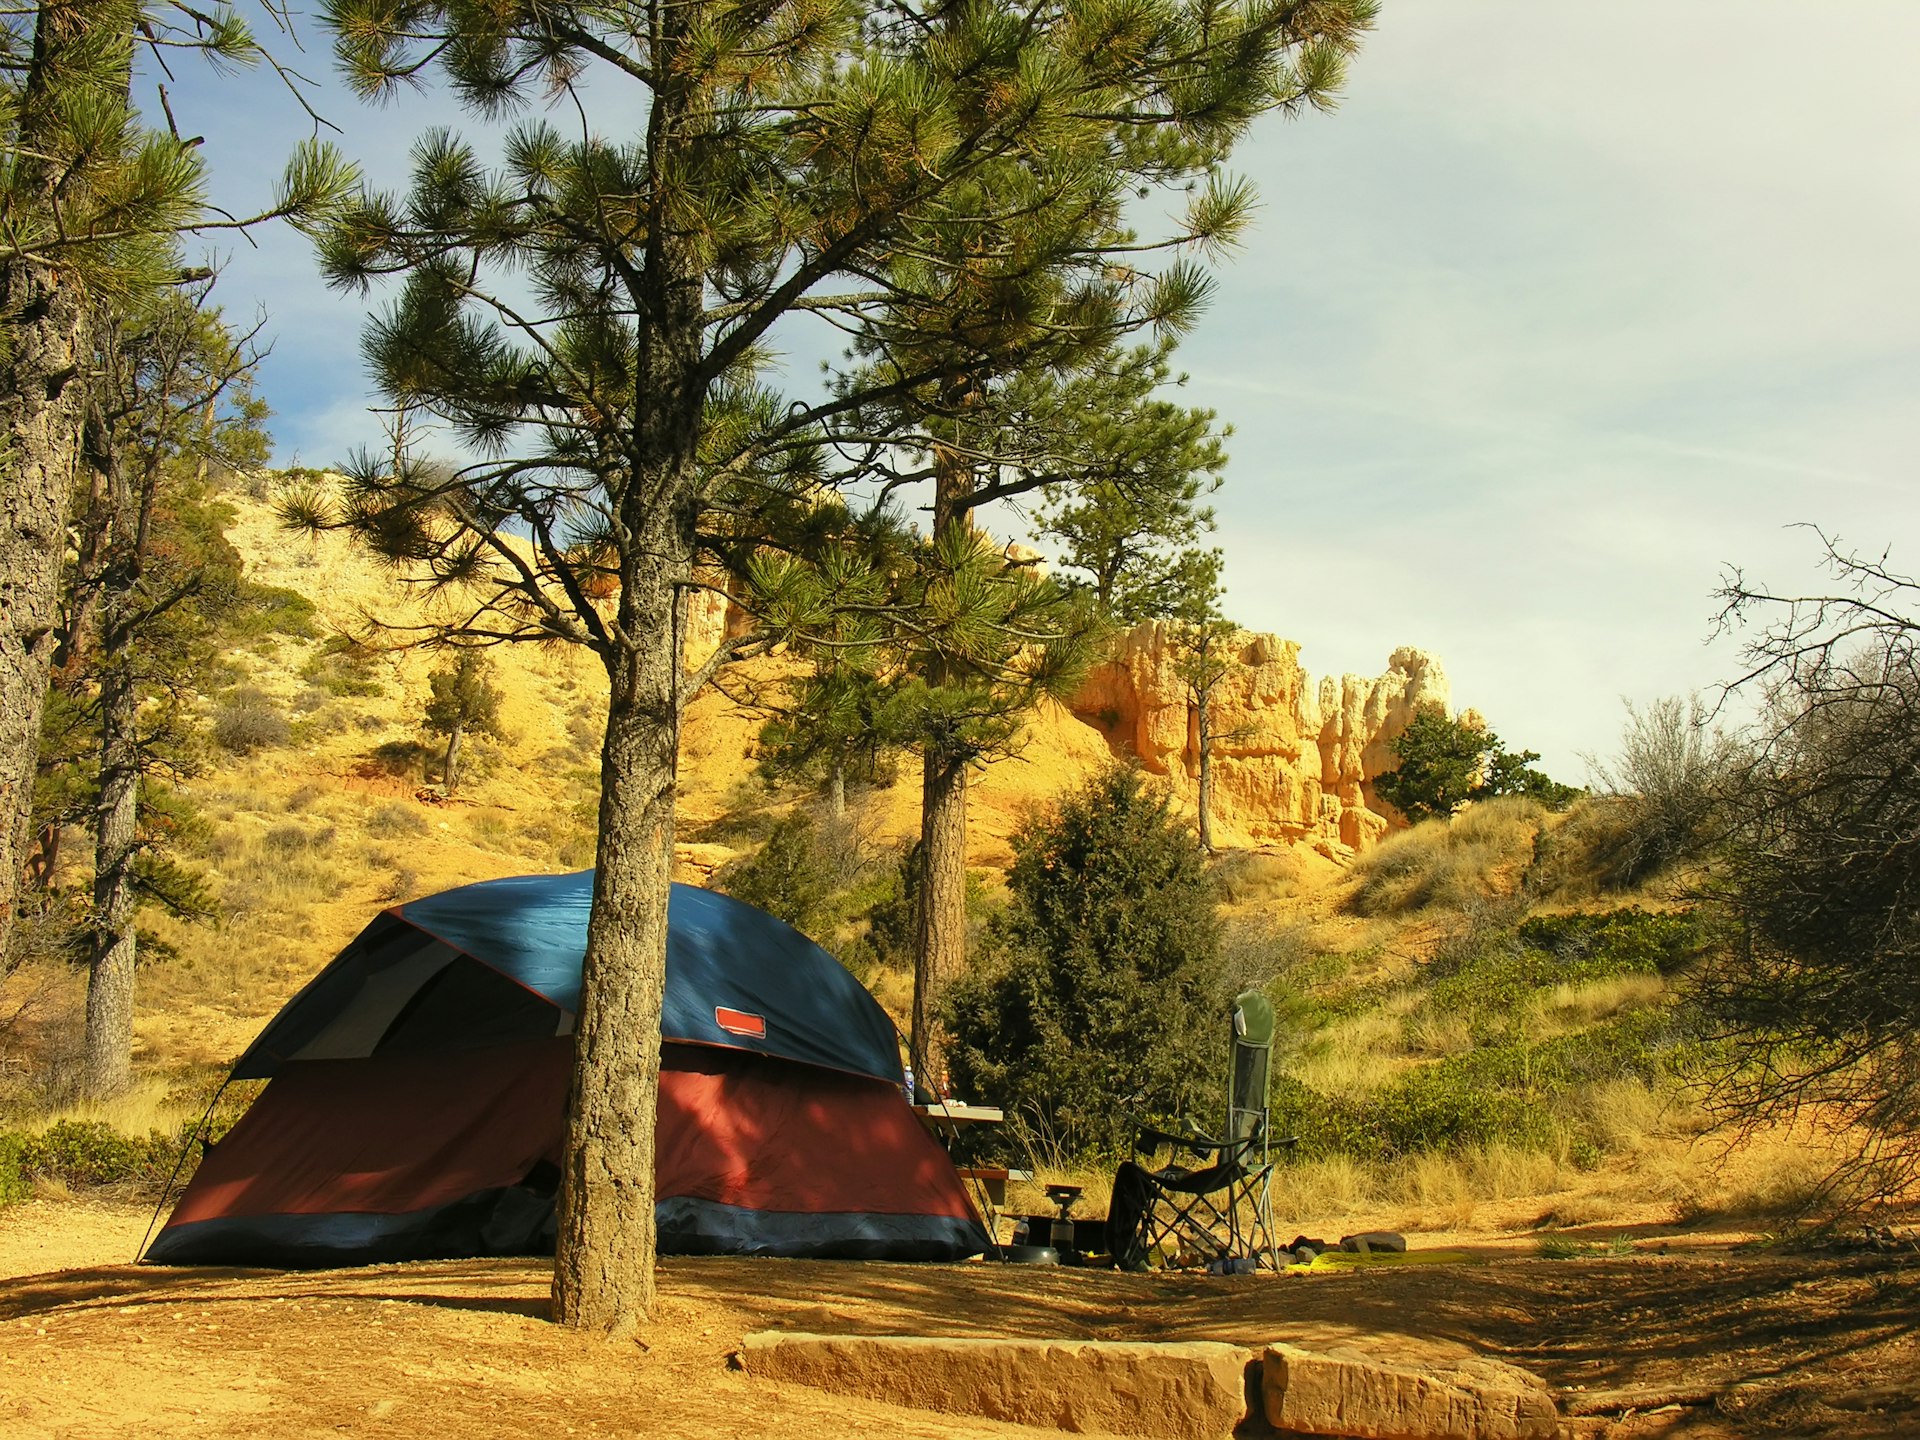 A tent at a campground during the late afternoon in the Bryce Canyon National Park.